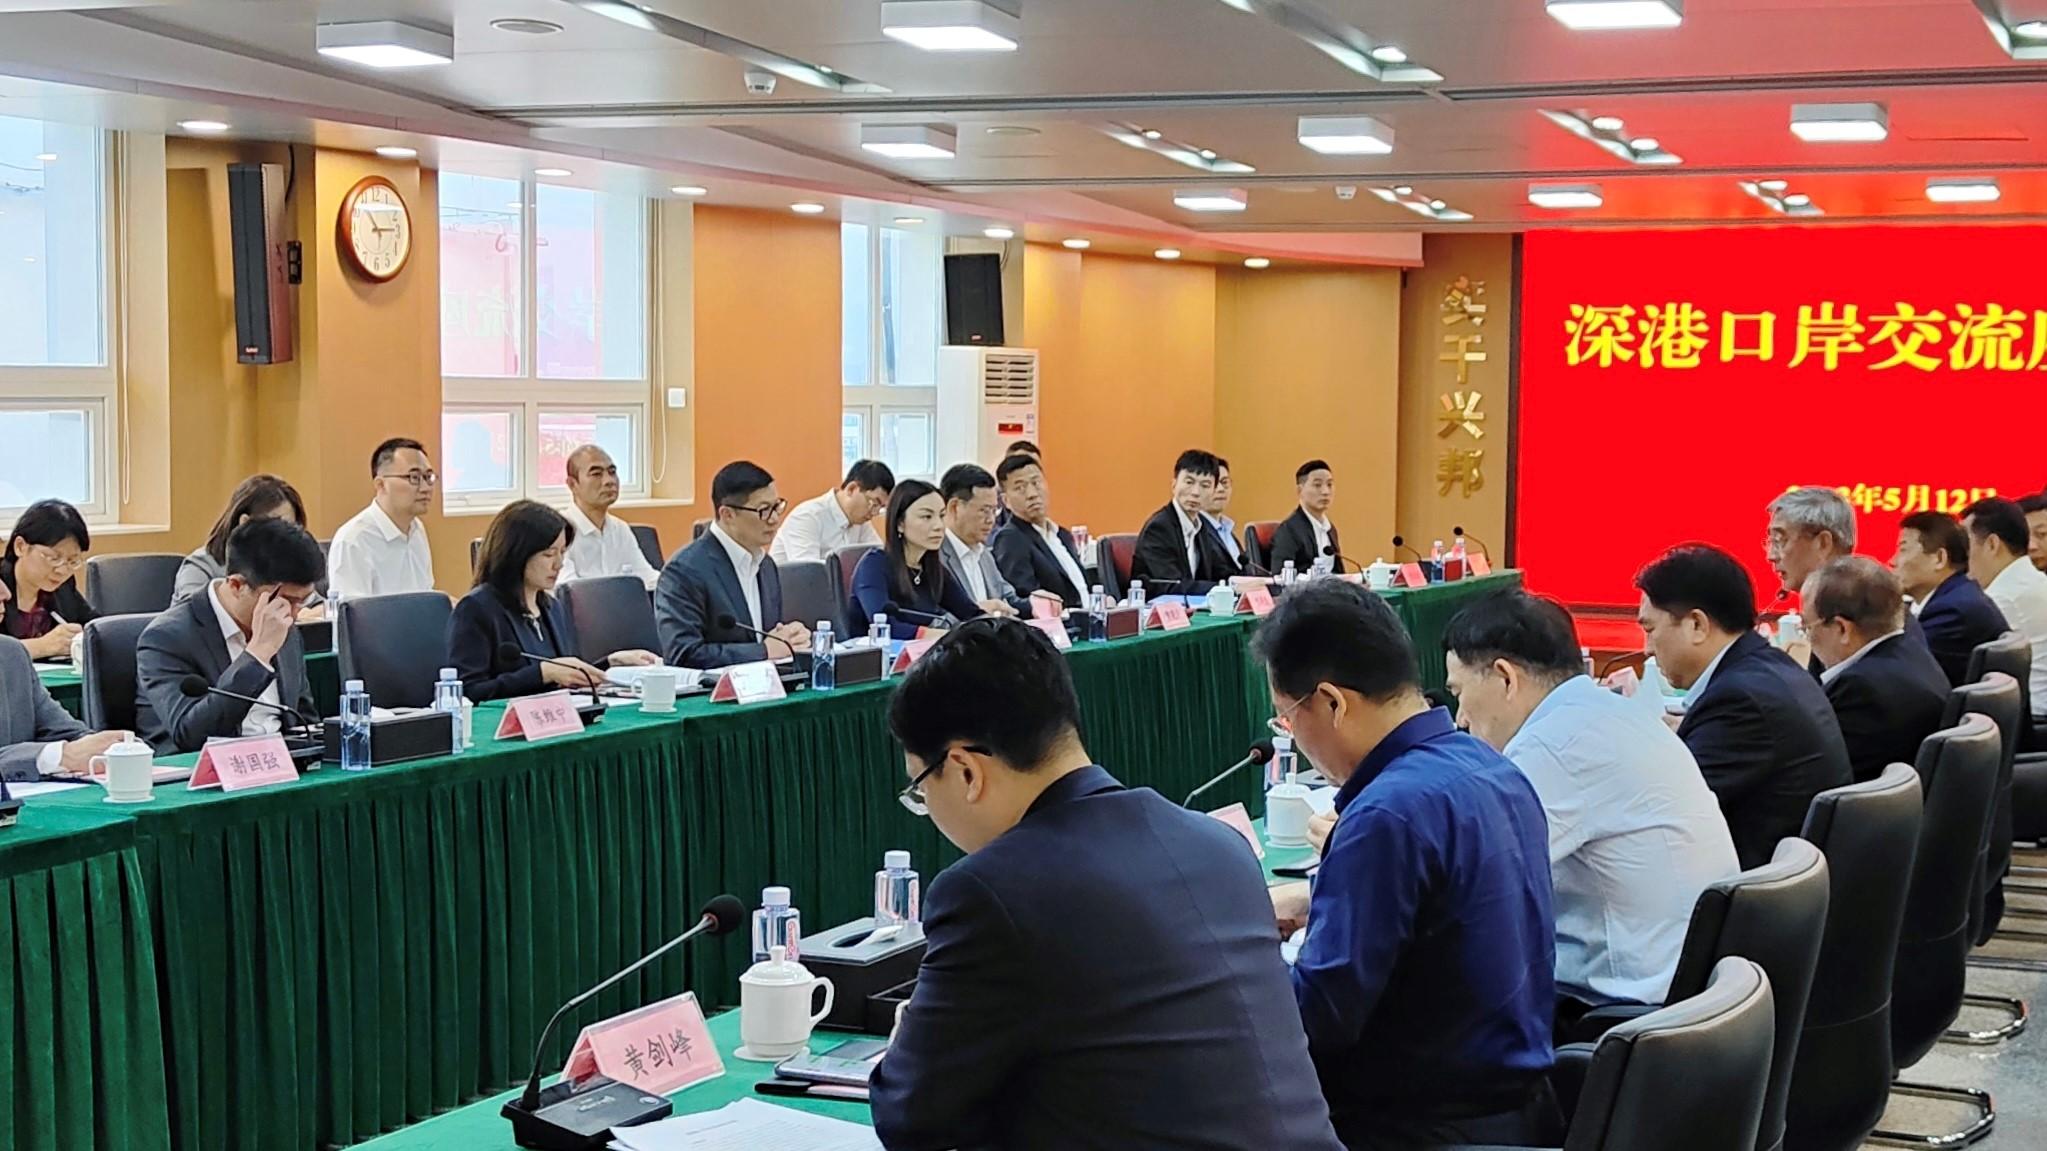 The Secretary for Security, Mr Tang Ping-keung, departed for Shenzhen to visit the Futian Control Point and the Lo Wu Control Point today (May 12). Photo shows Mr Tang (first row, third left) attending a seminar held by the Office of Port of Entry and Exit of the Shenzhen Municipal People’s Government to exchange views with the Shenzhen counterparts on taking forward the planning and development of land boundary control points.